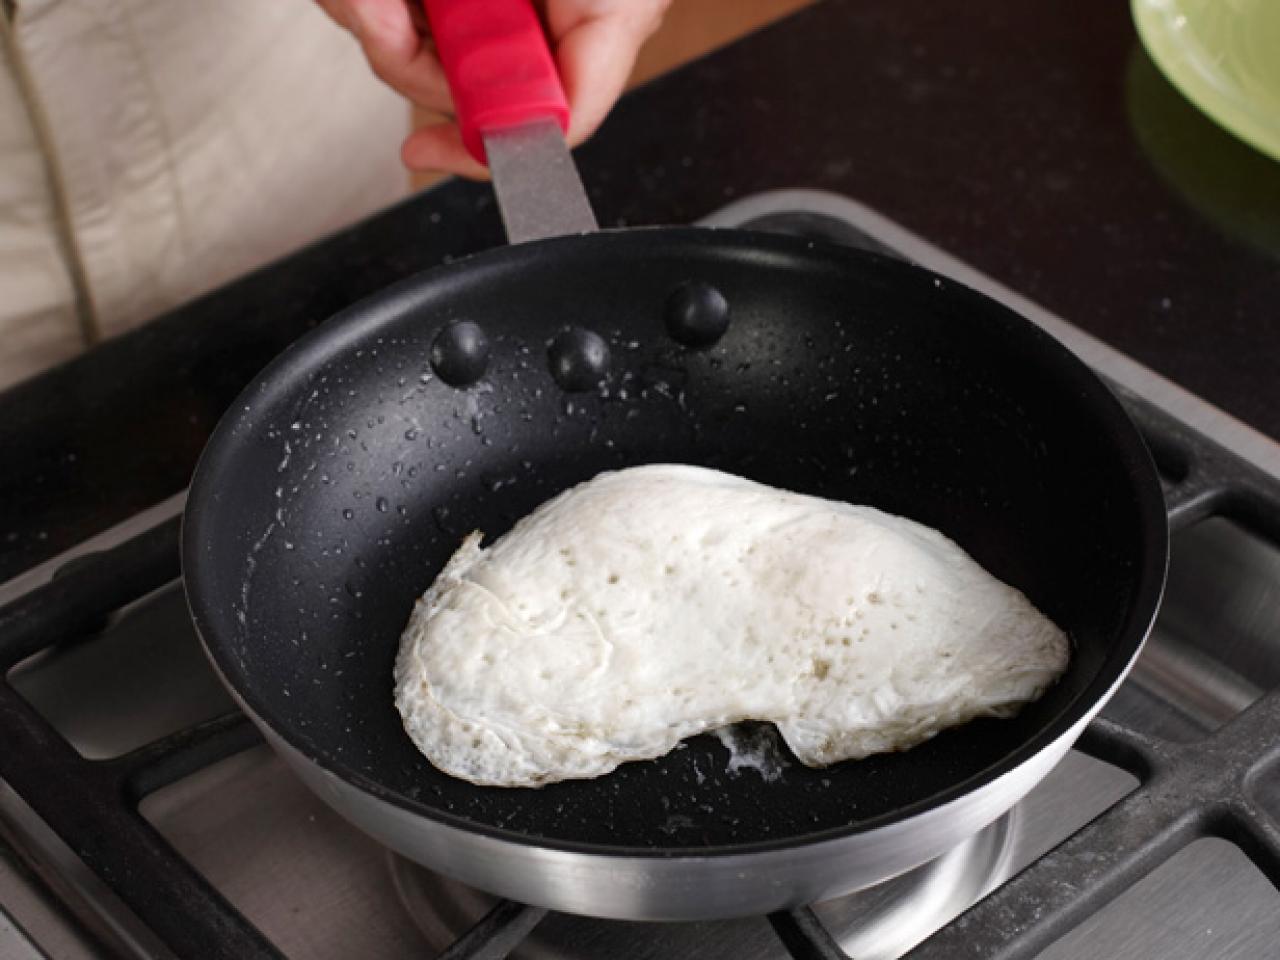 Emeril Lagasse 11-Inch High-Sided Frying Pan